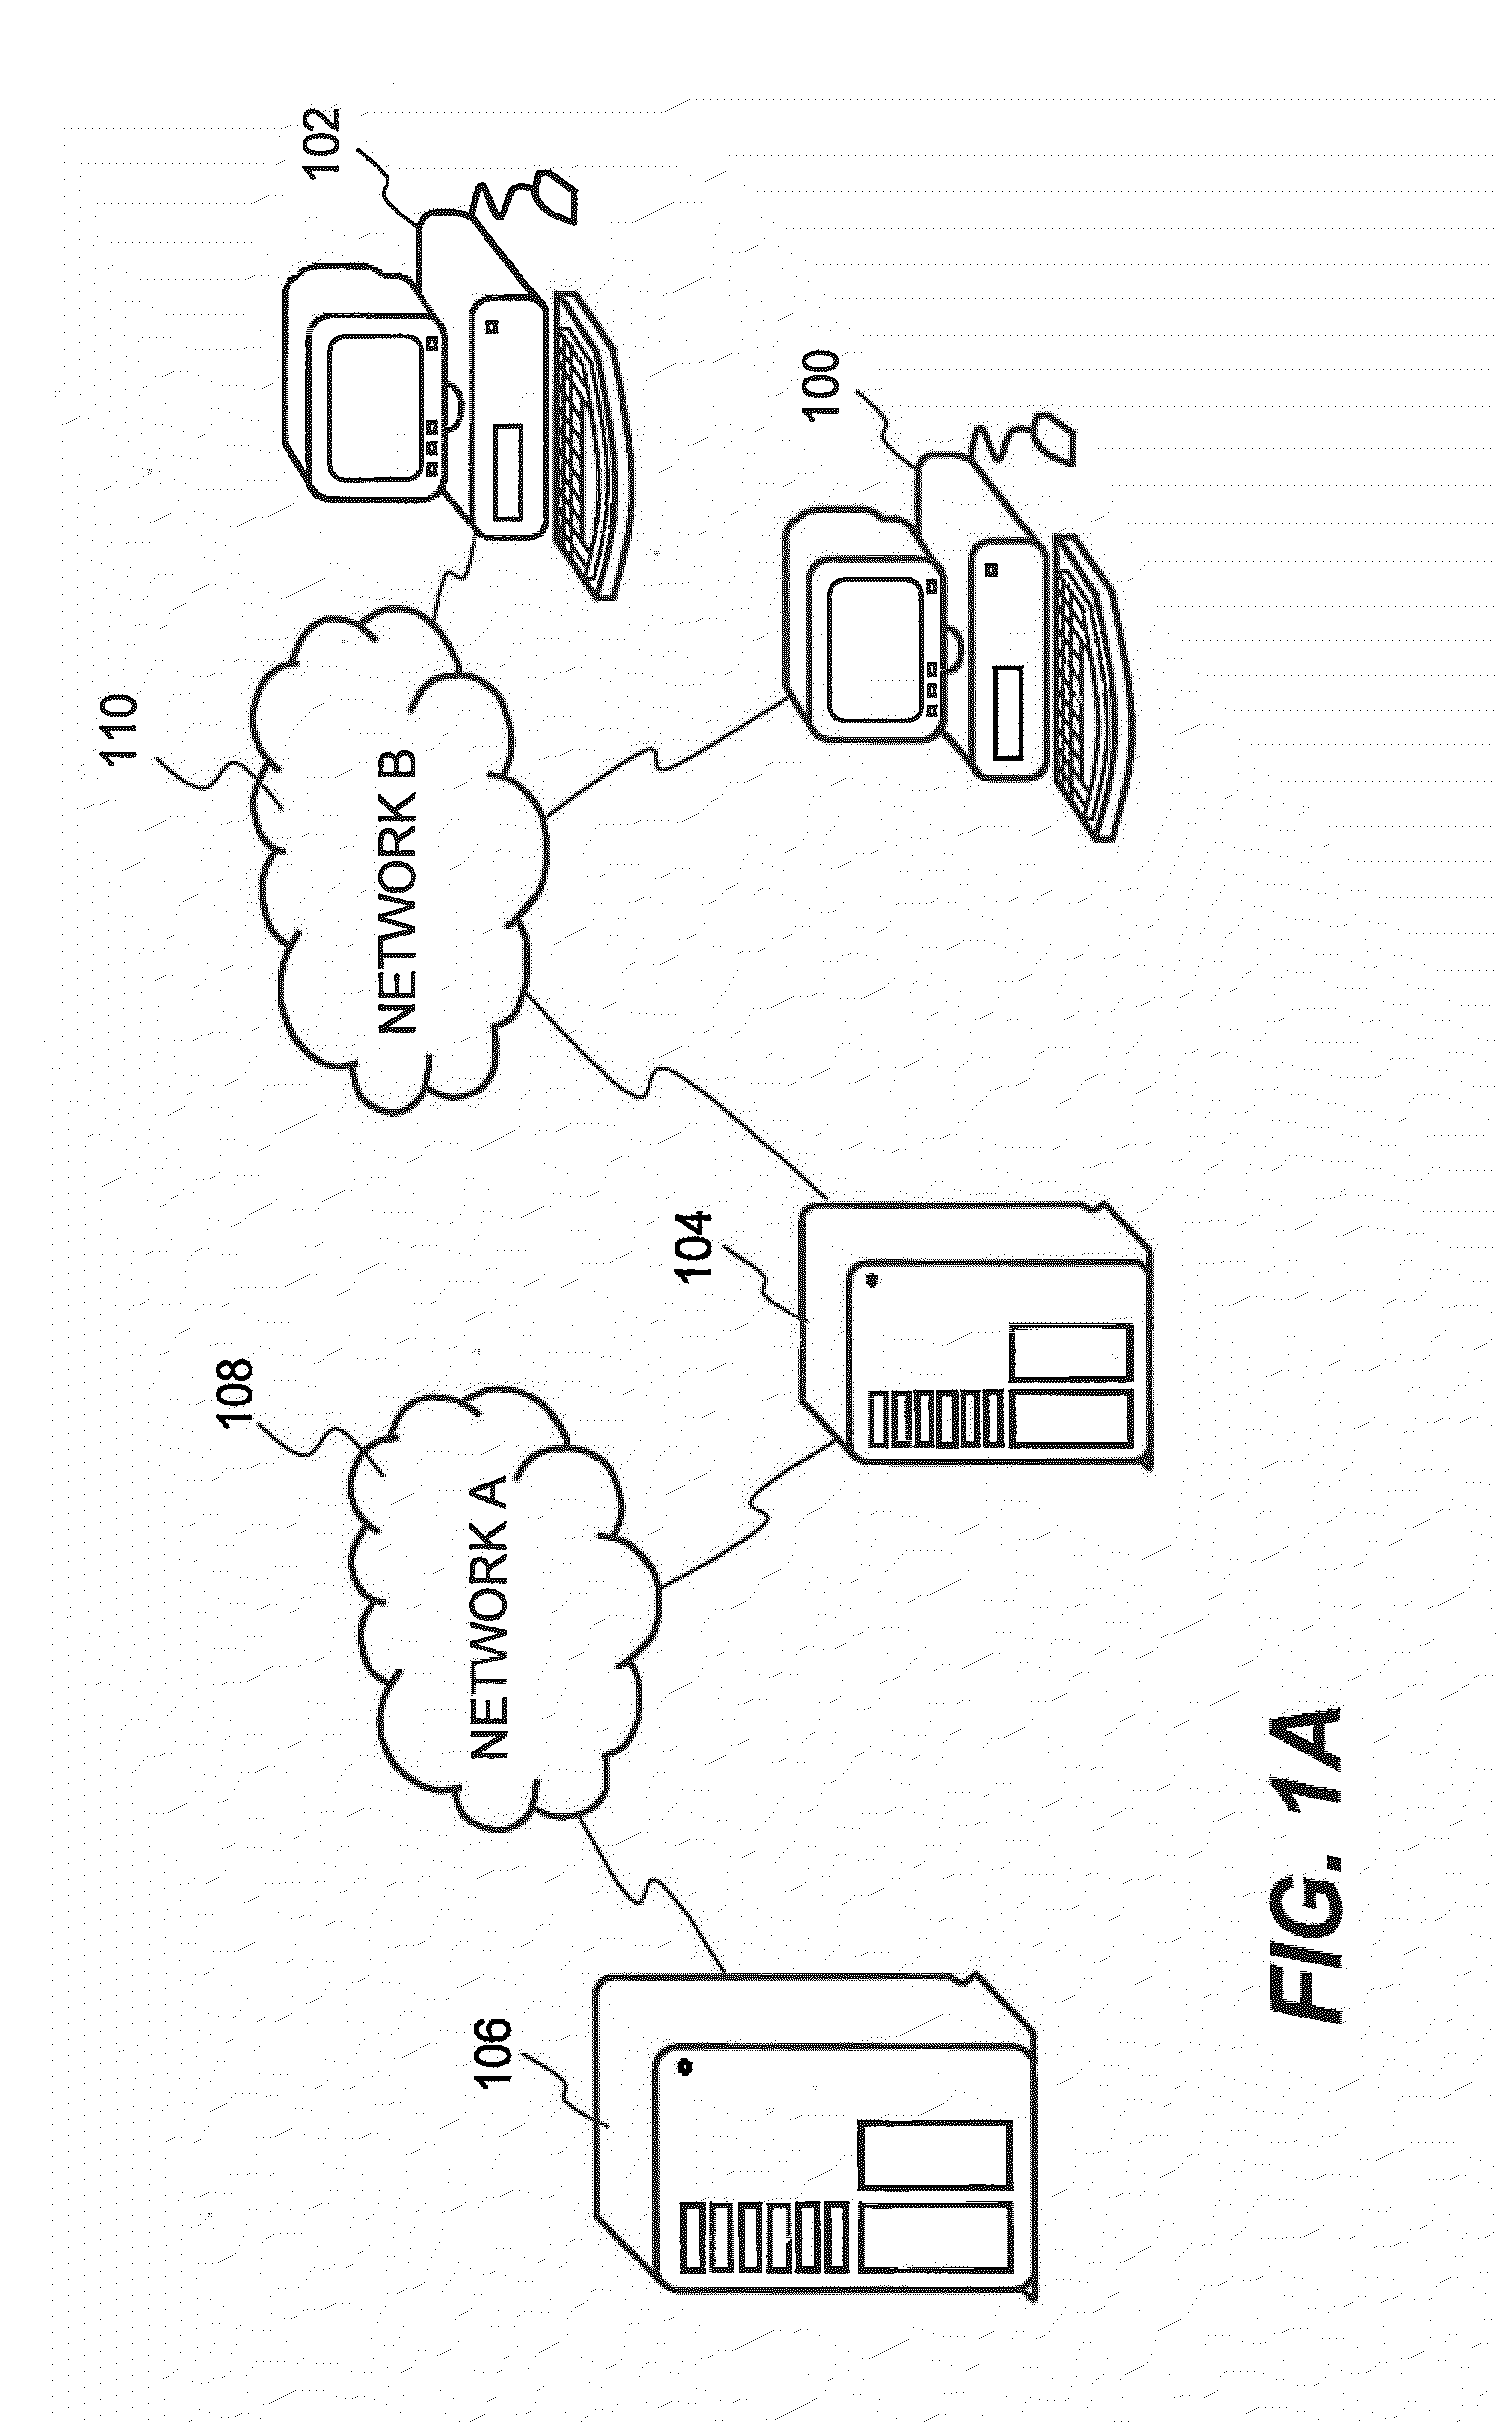 System and Method for Providing Different Levels of Key Security for Controlling Access to Secured Items